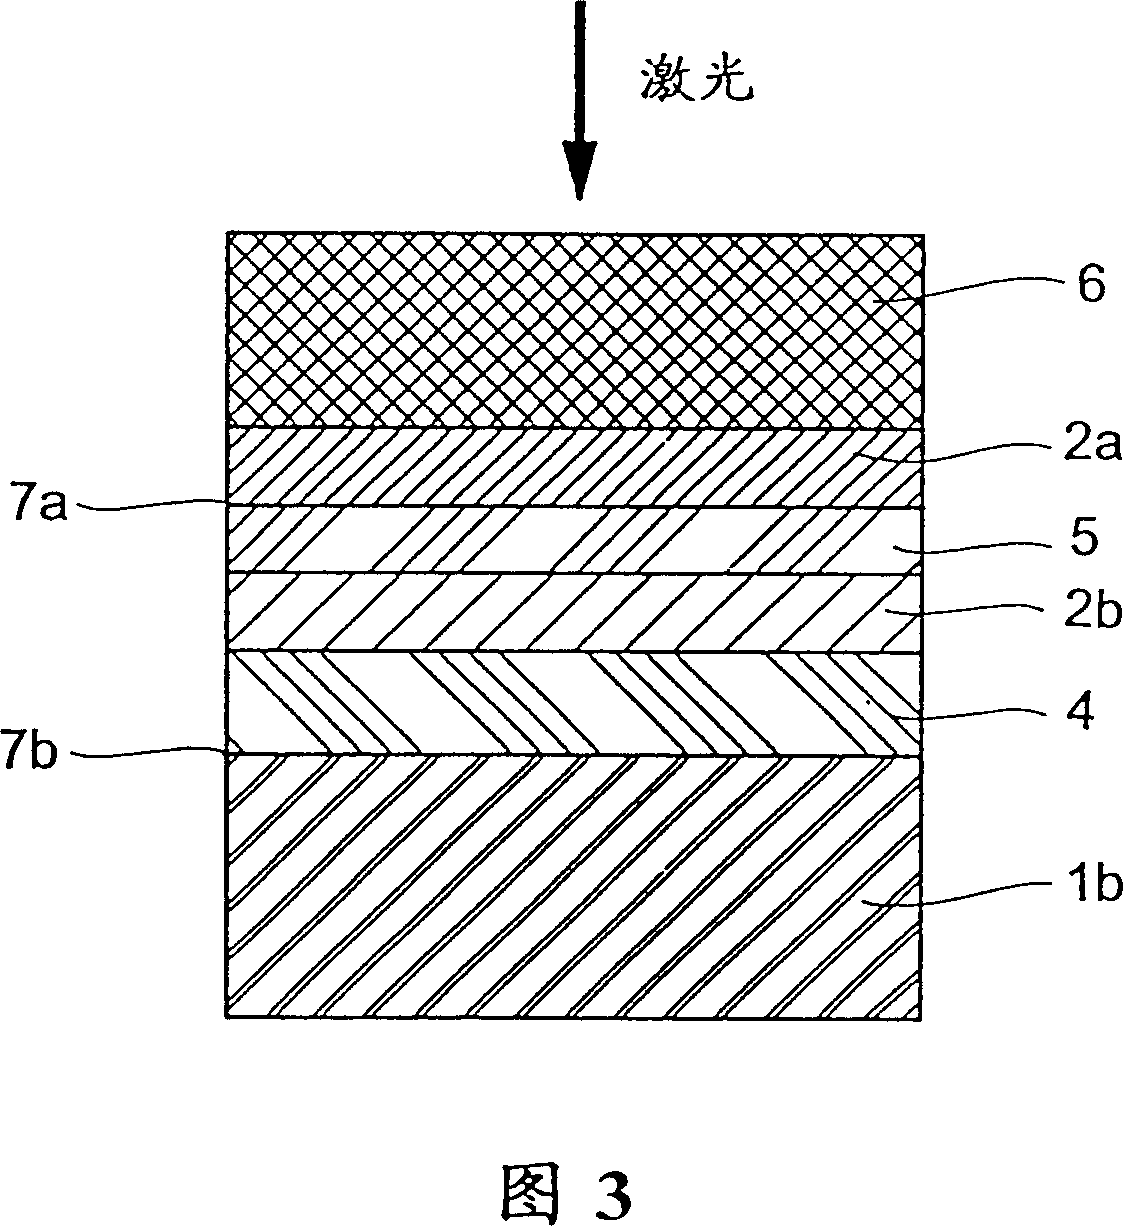 Multilayer film information storage medium capable of covering and writing